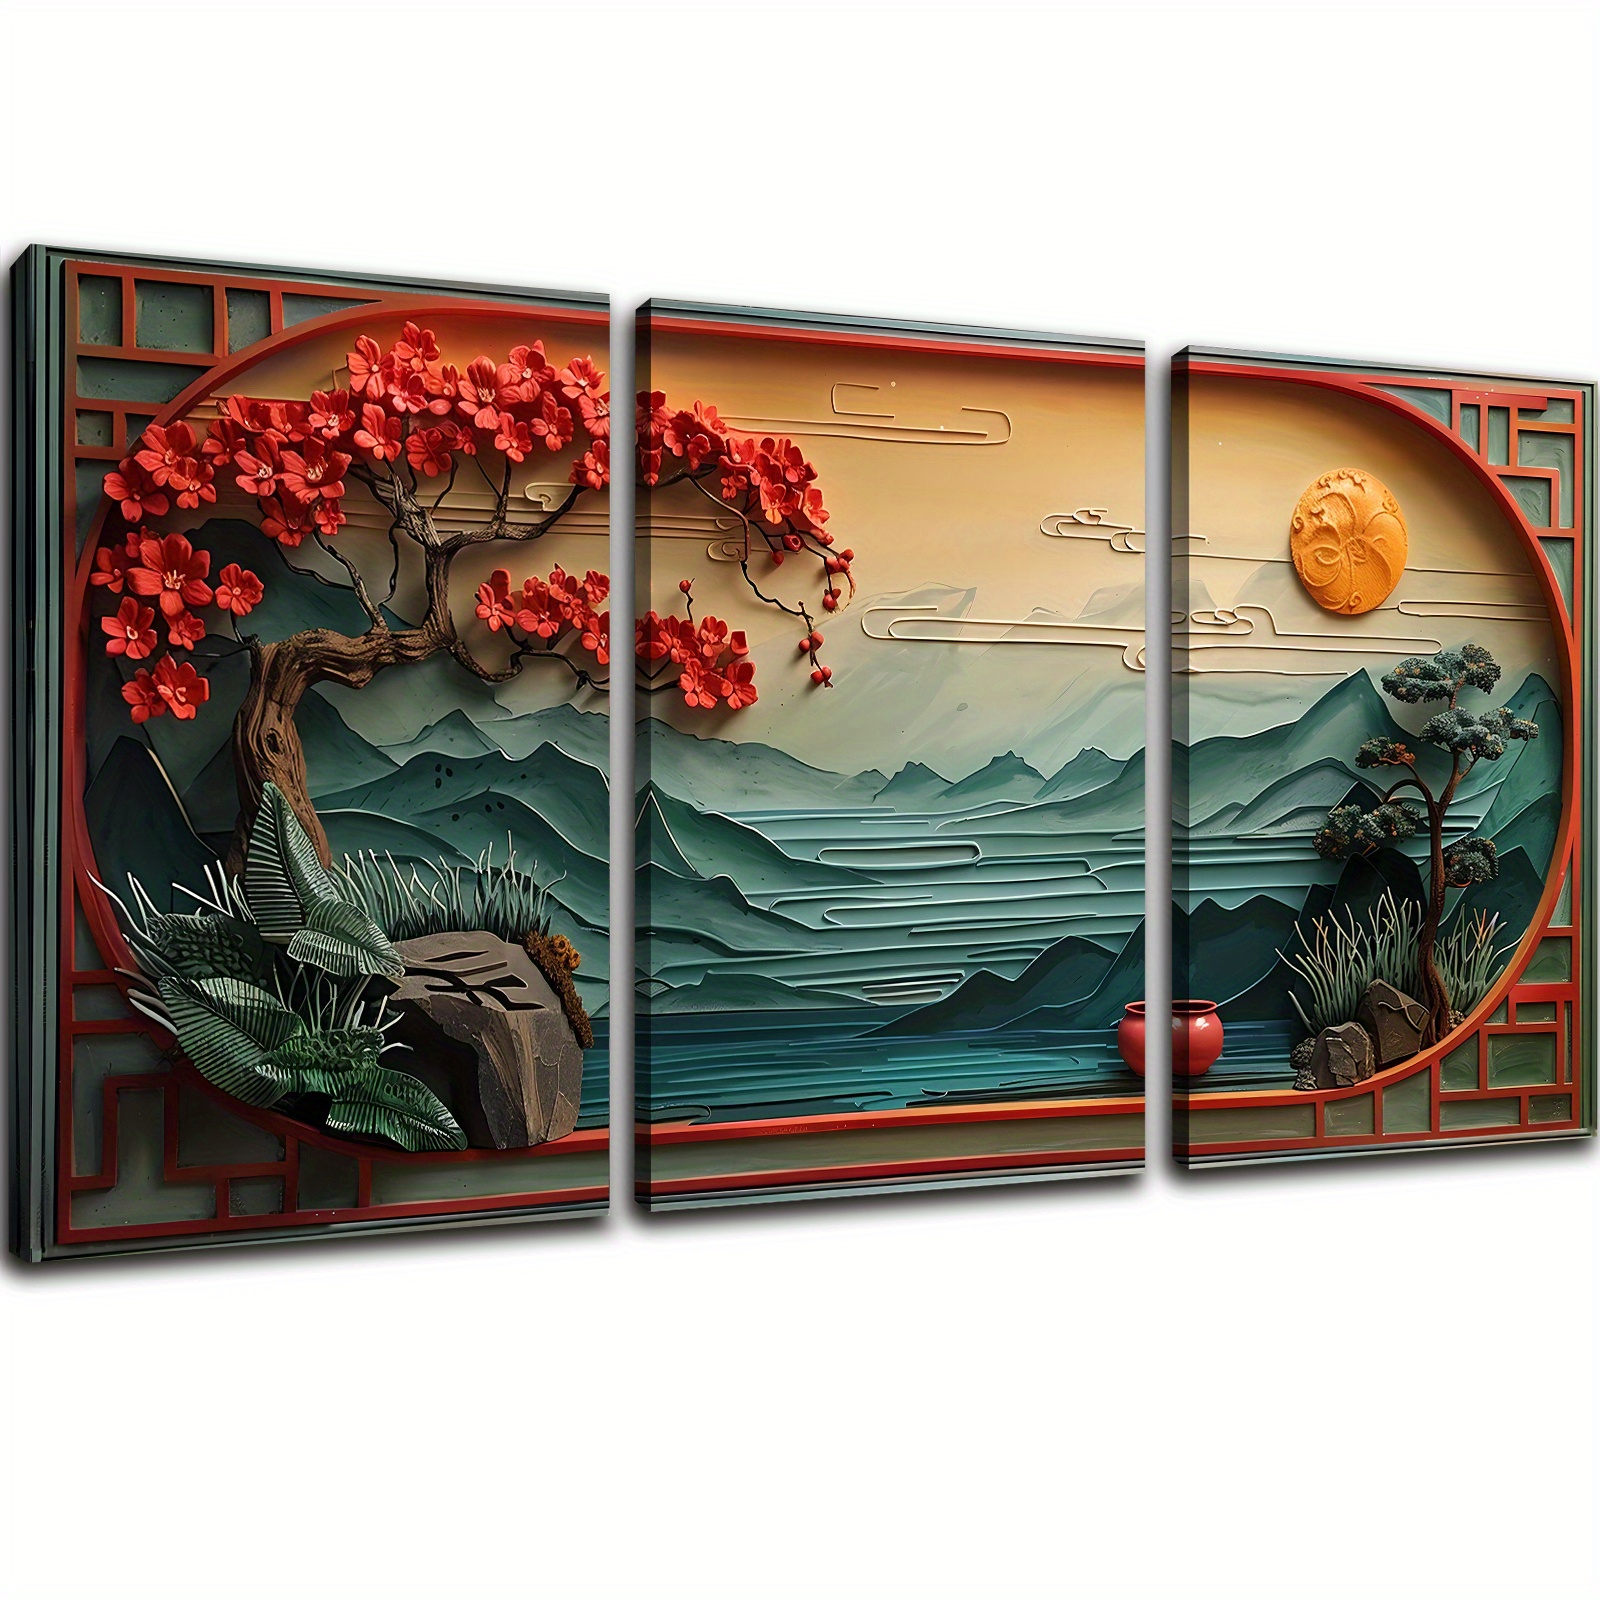 

3 Piece Framed Spring Canvas Wall Art Decor Easy Hanging For Bedroom Home Kitchen Surrealism Decorations Women Mother's Day Gifts Japanese Tea Ceremony Theme Design Piece 369